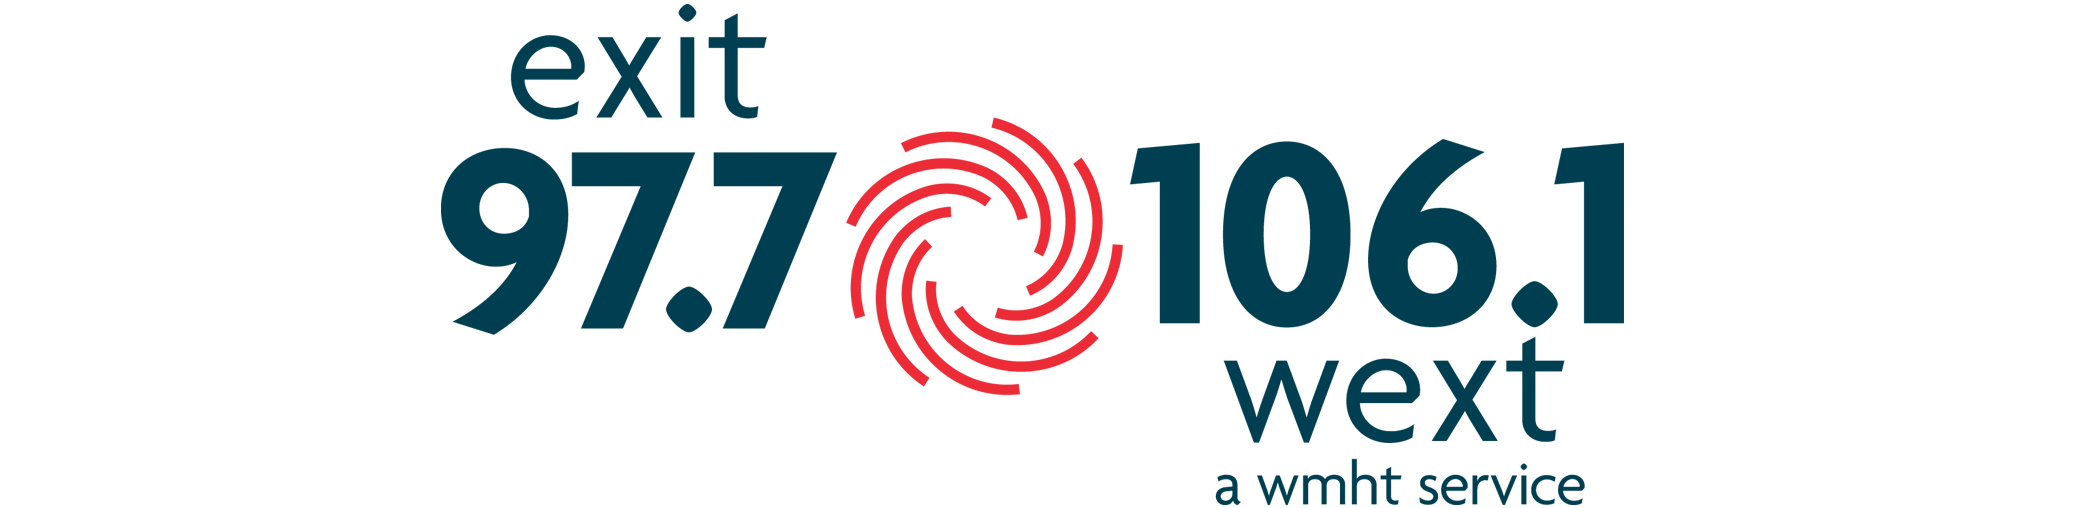 Radio Signal Logo - WEXT Radio Expands Signal With Addition of 106.1 | WEXT